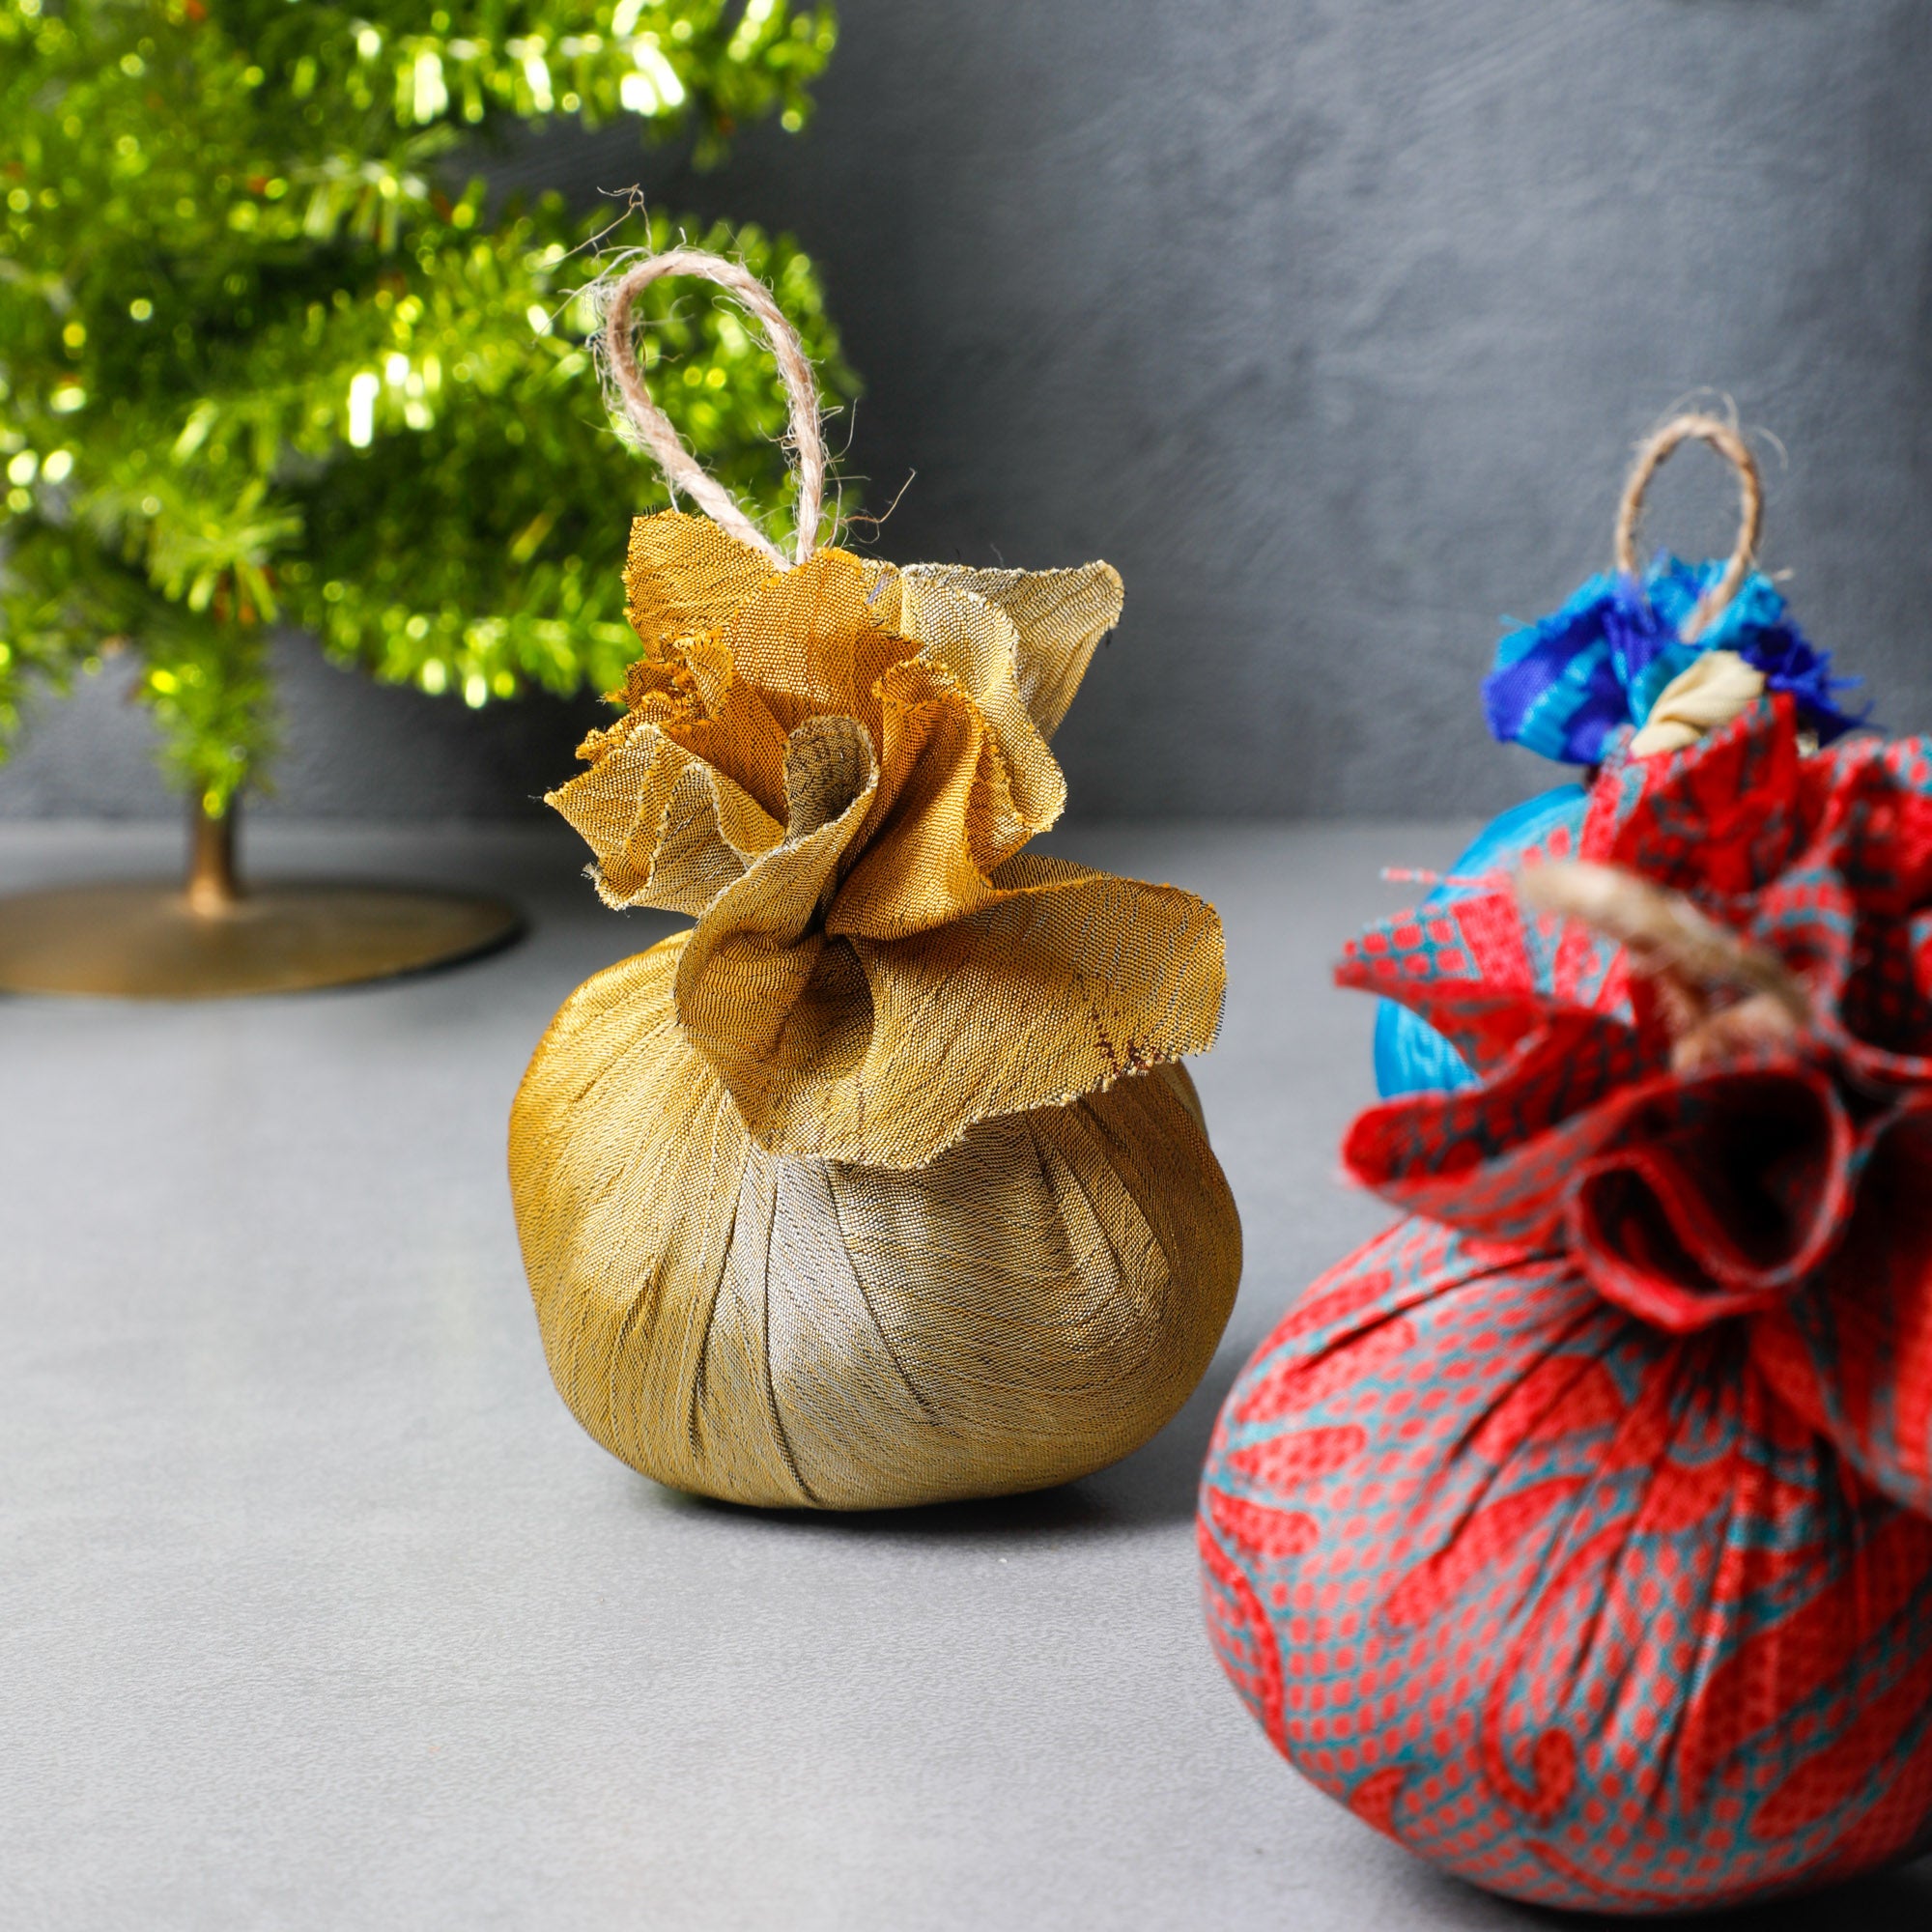 these ornaments radiate charm to your Christmas tree